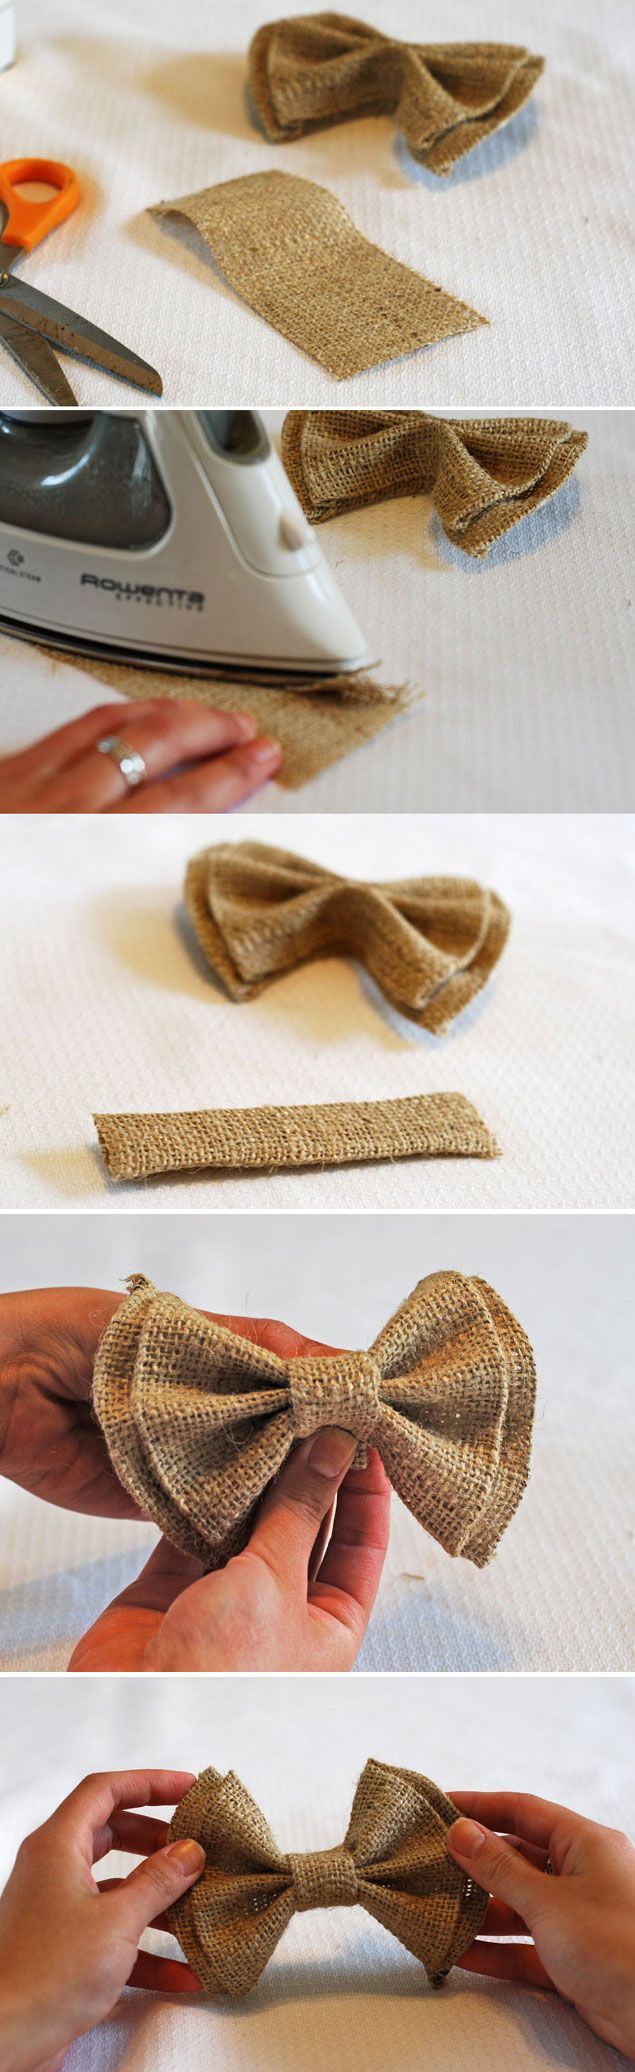 No Sew DIY Clip on Bow Ties – could make regular ties out of burlap as well. There is also colored burlap. What a neat idea for a